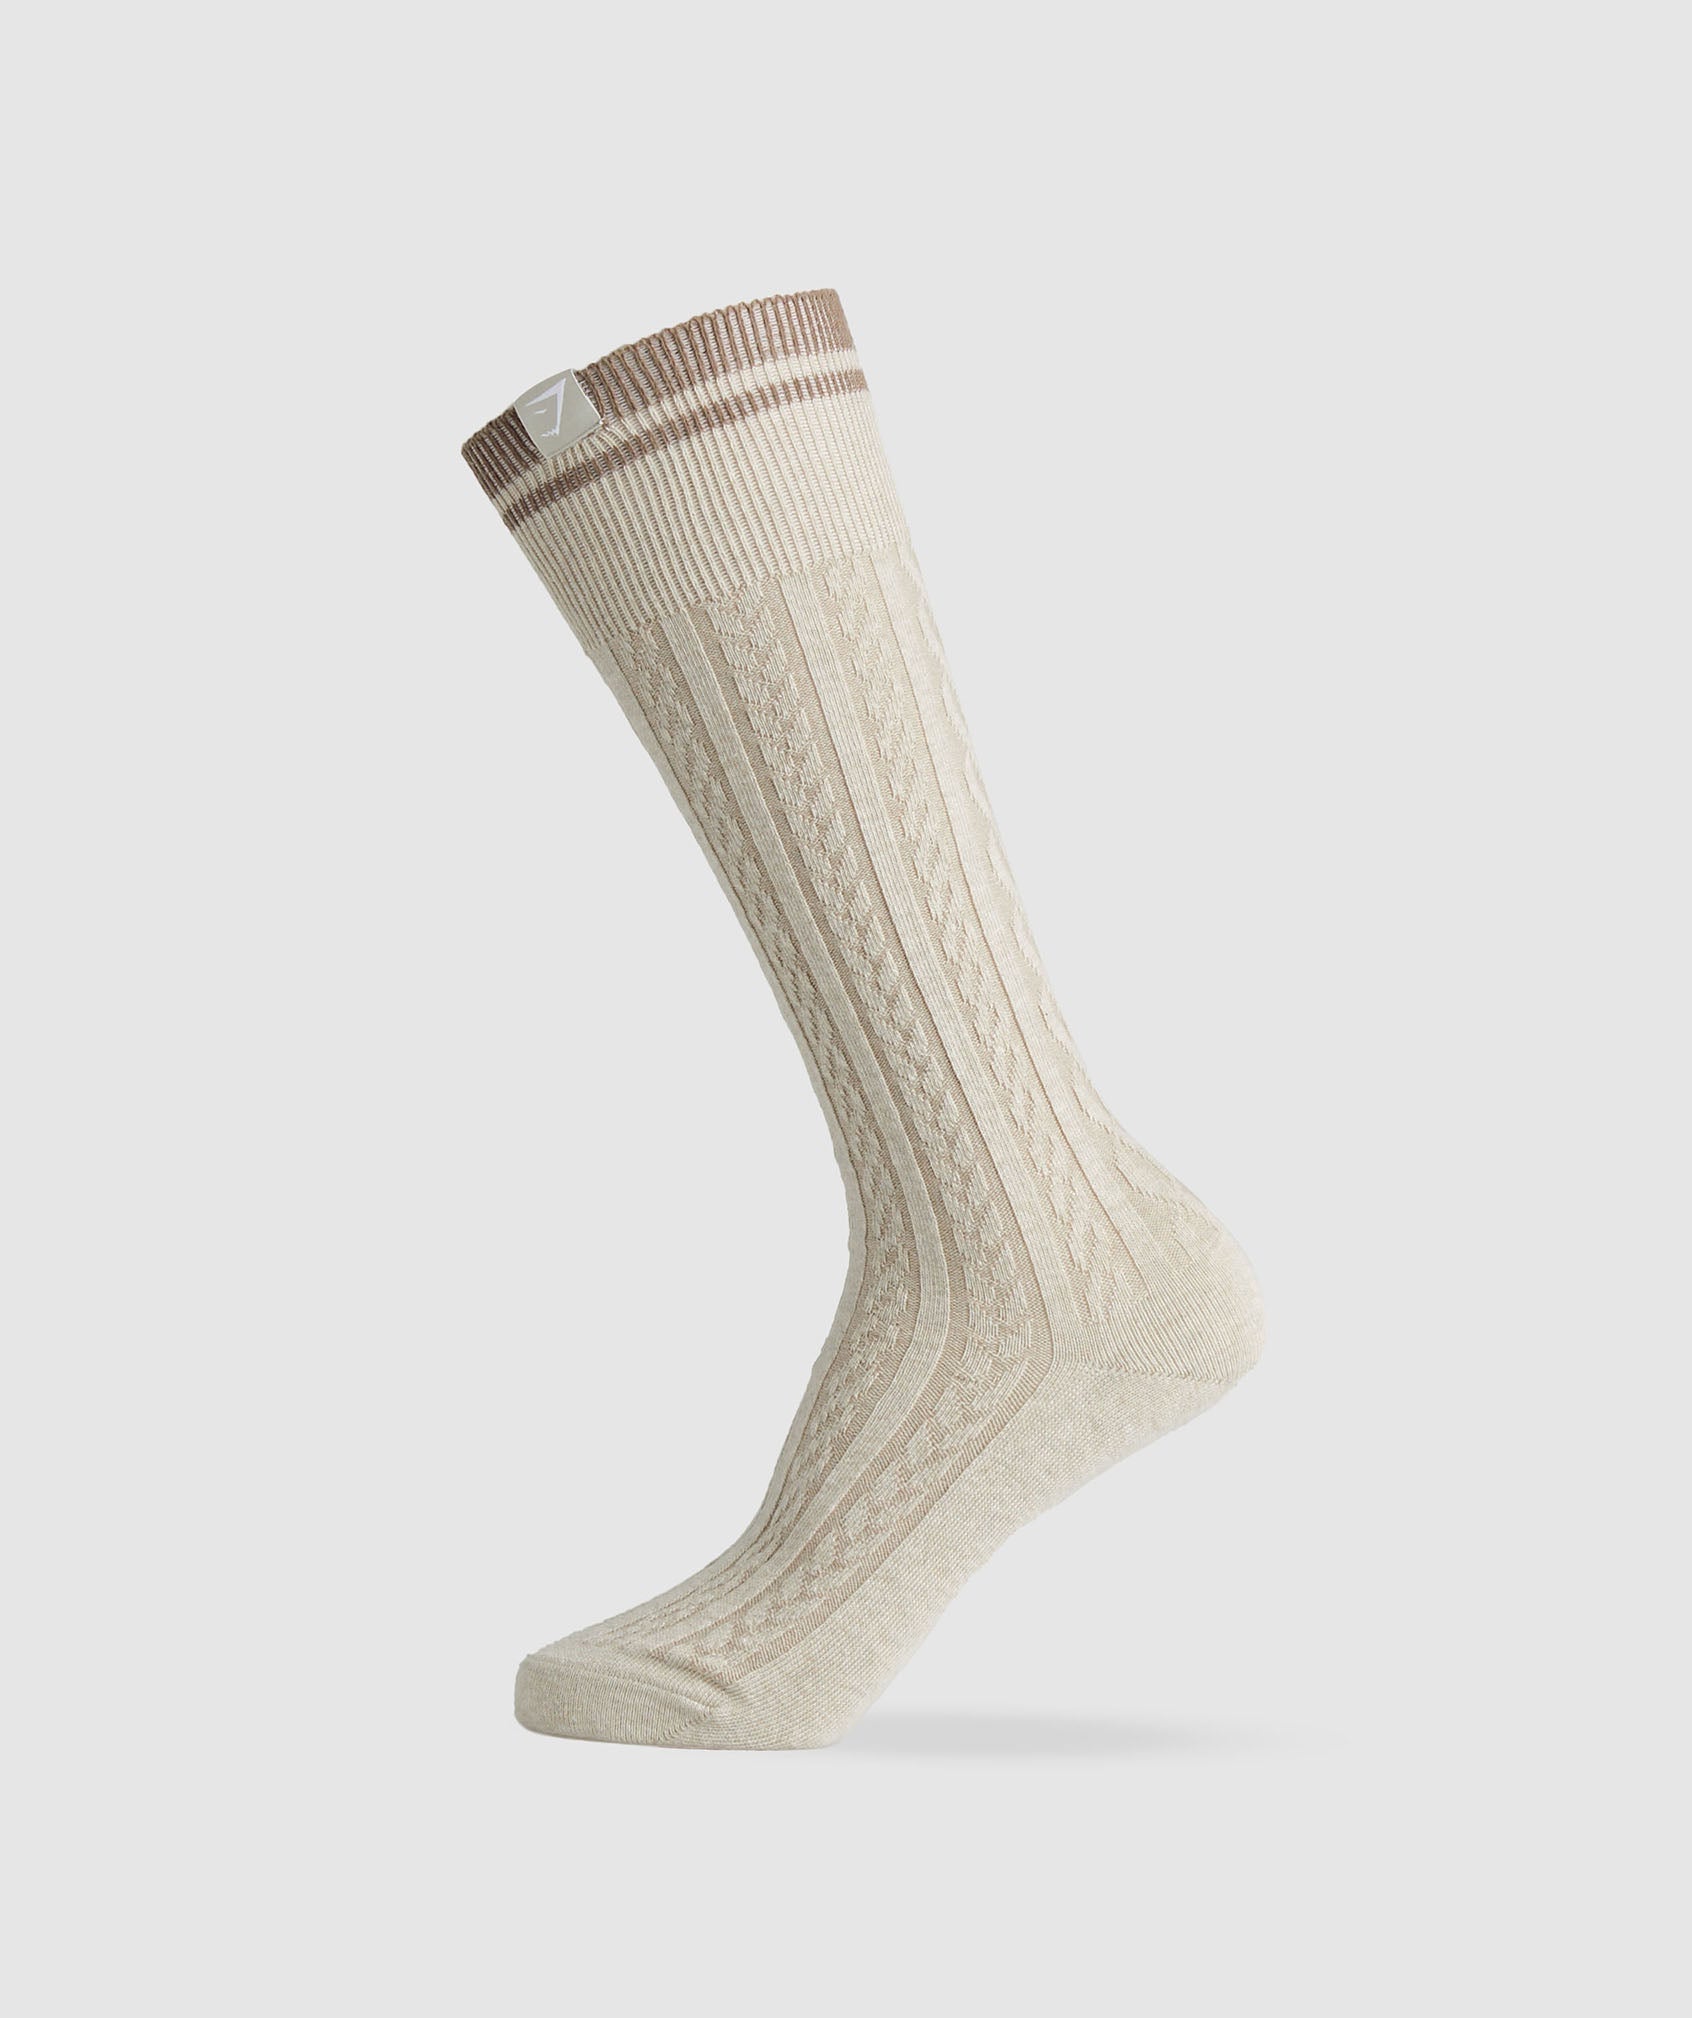 Rest Day Cable Socks